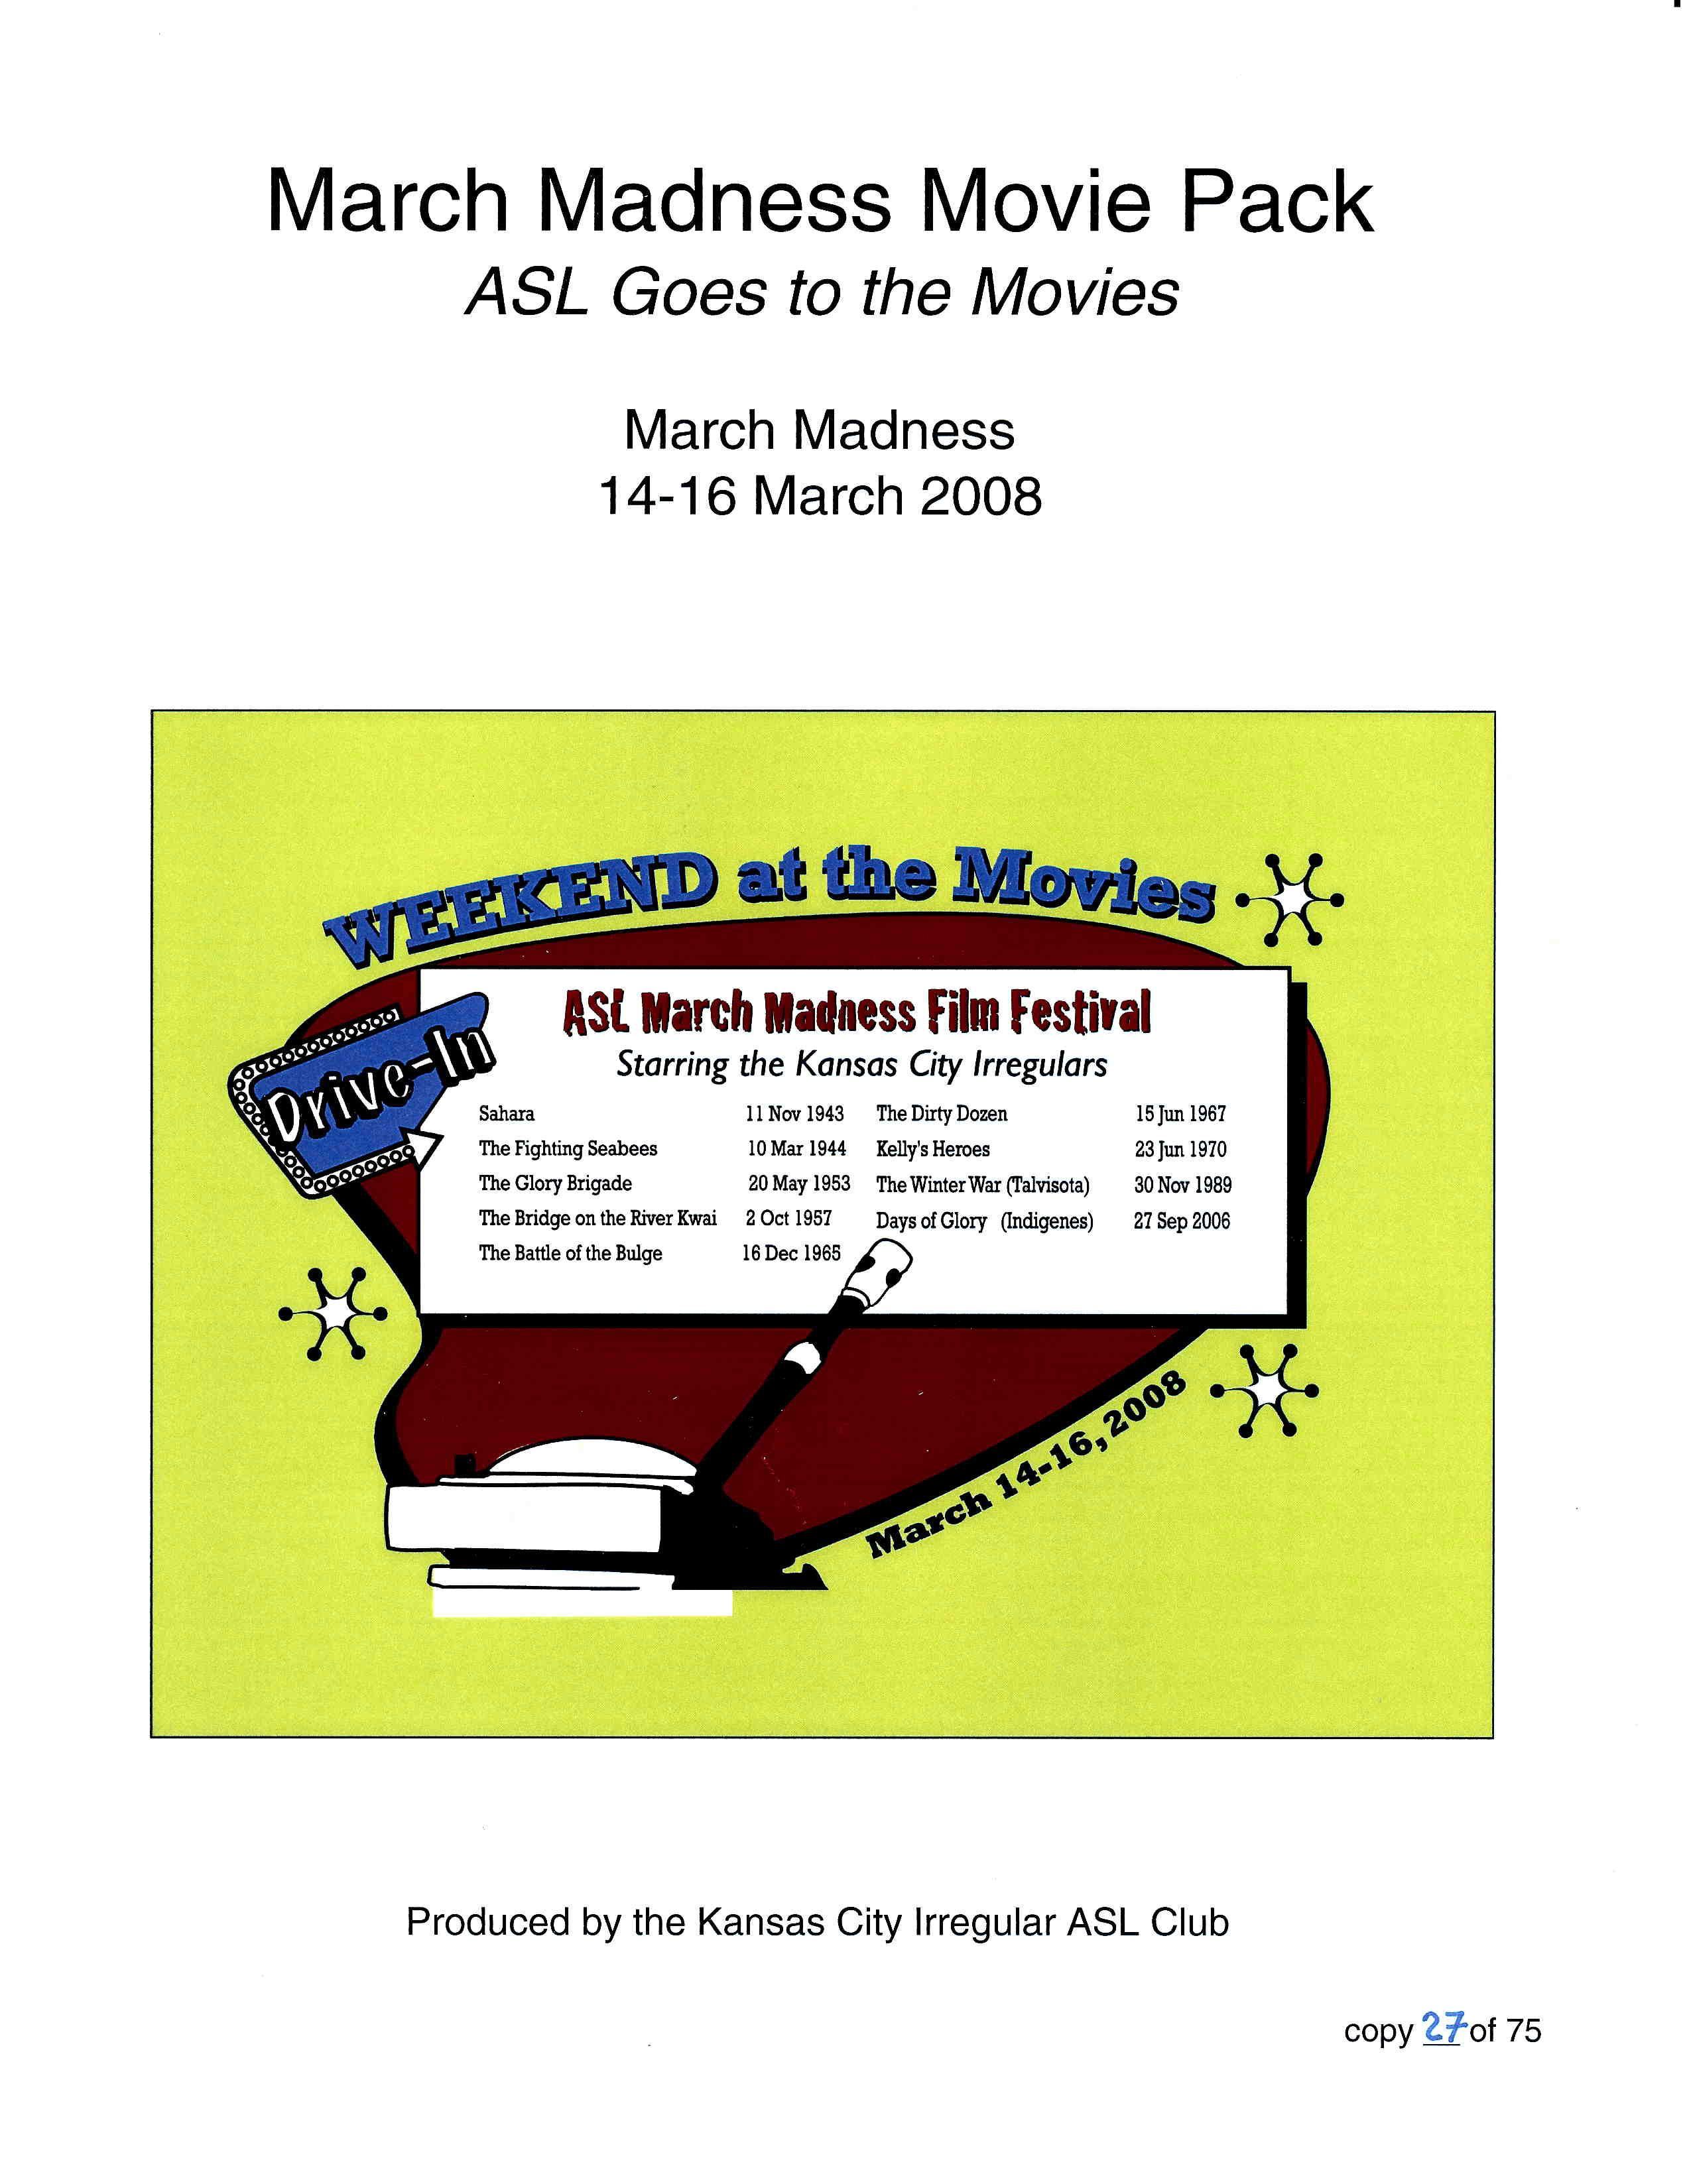 March Madness Movie Pack: ASL Goes to the Movies